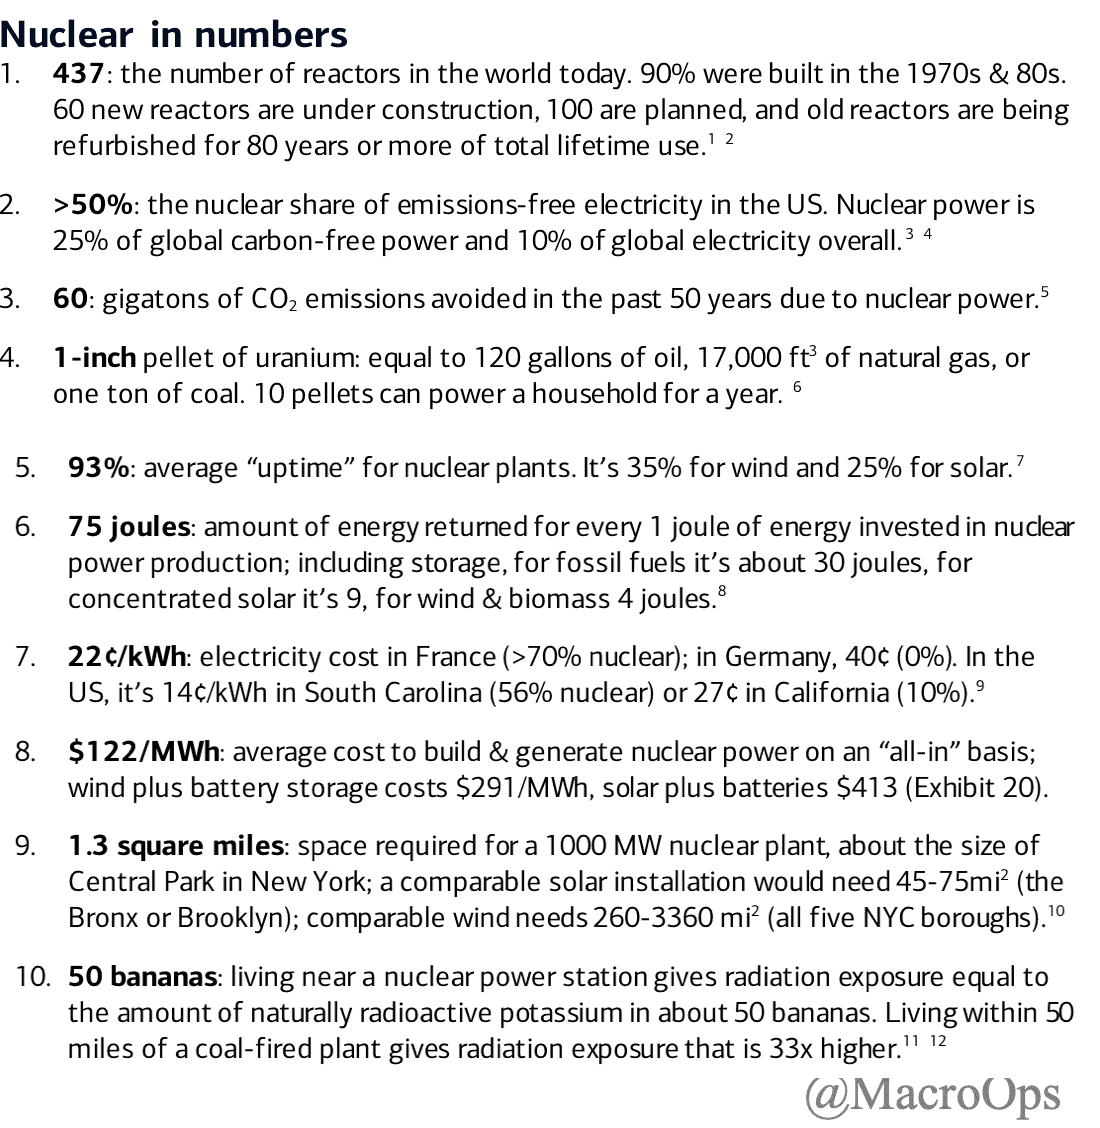 Nuclear in Numbers 051523